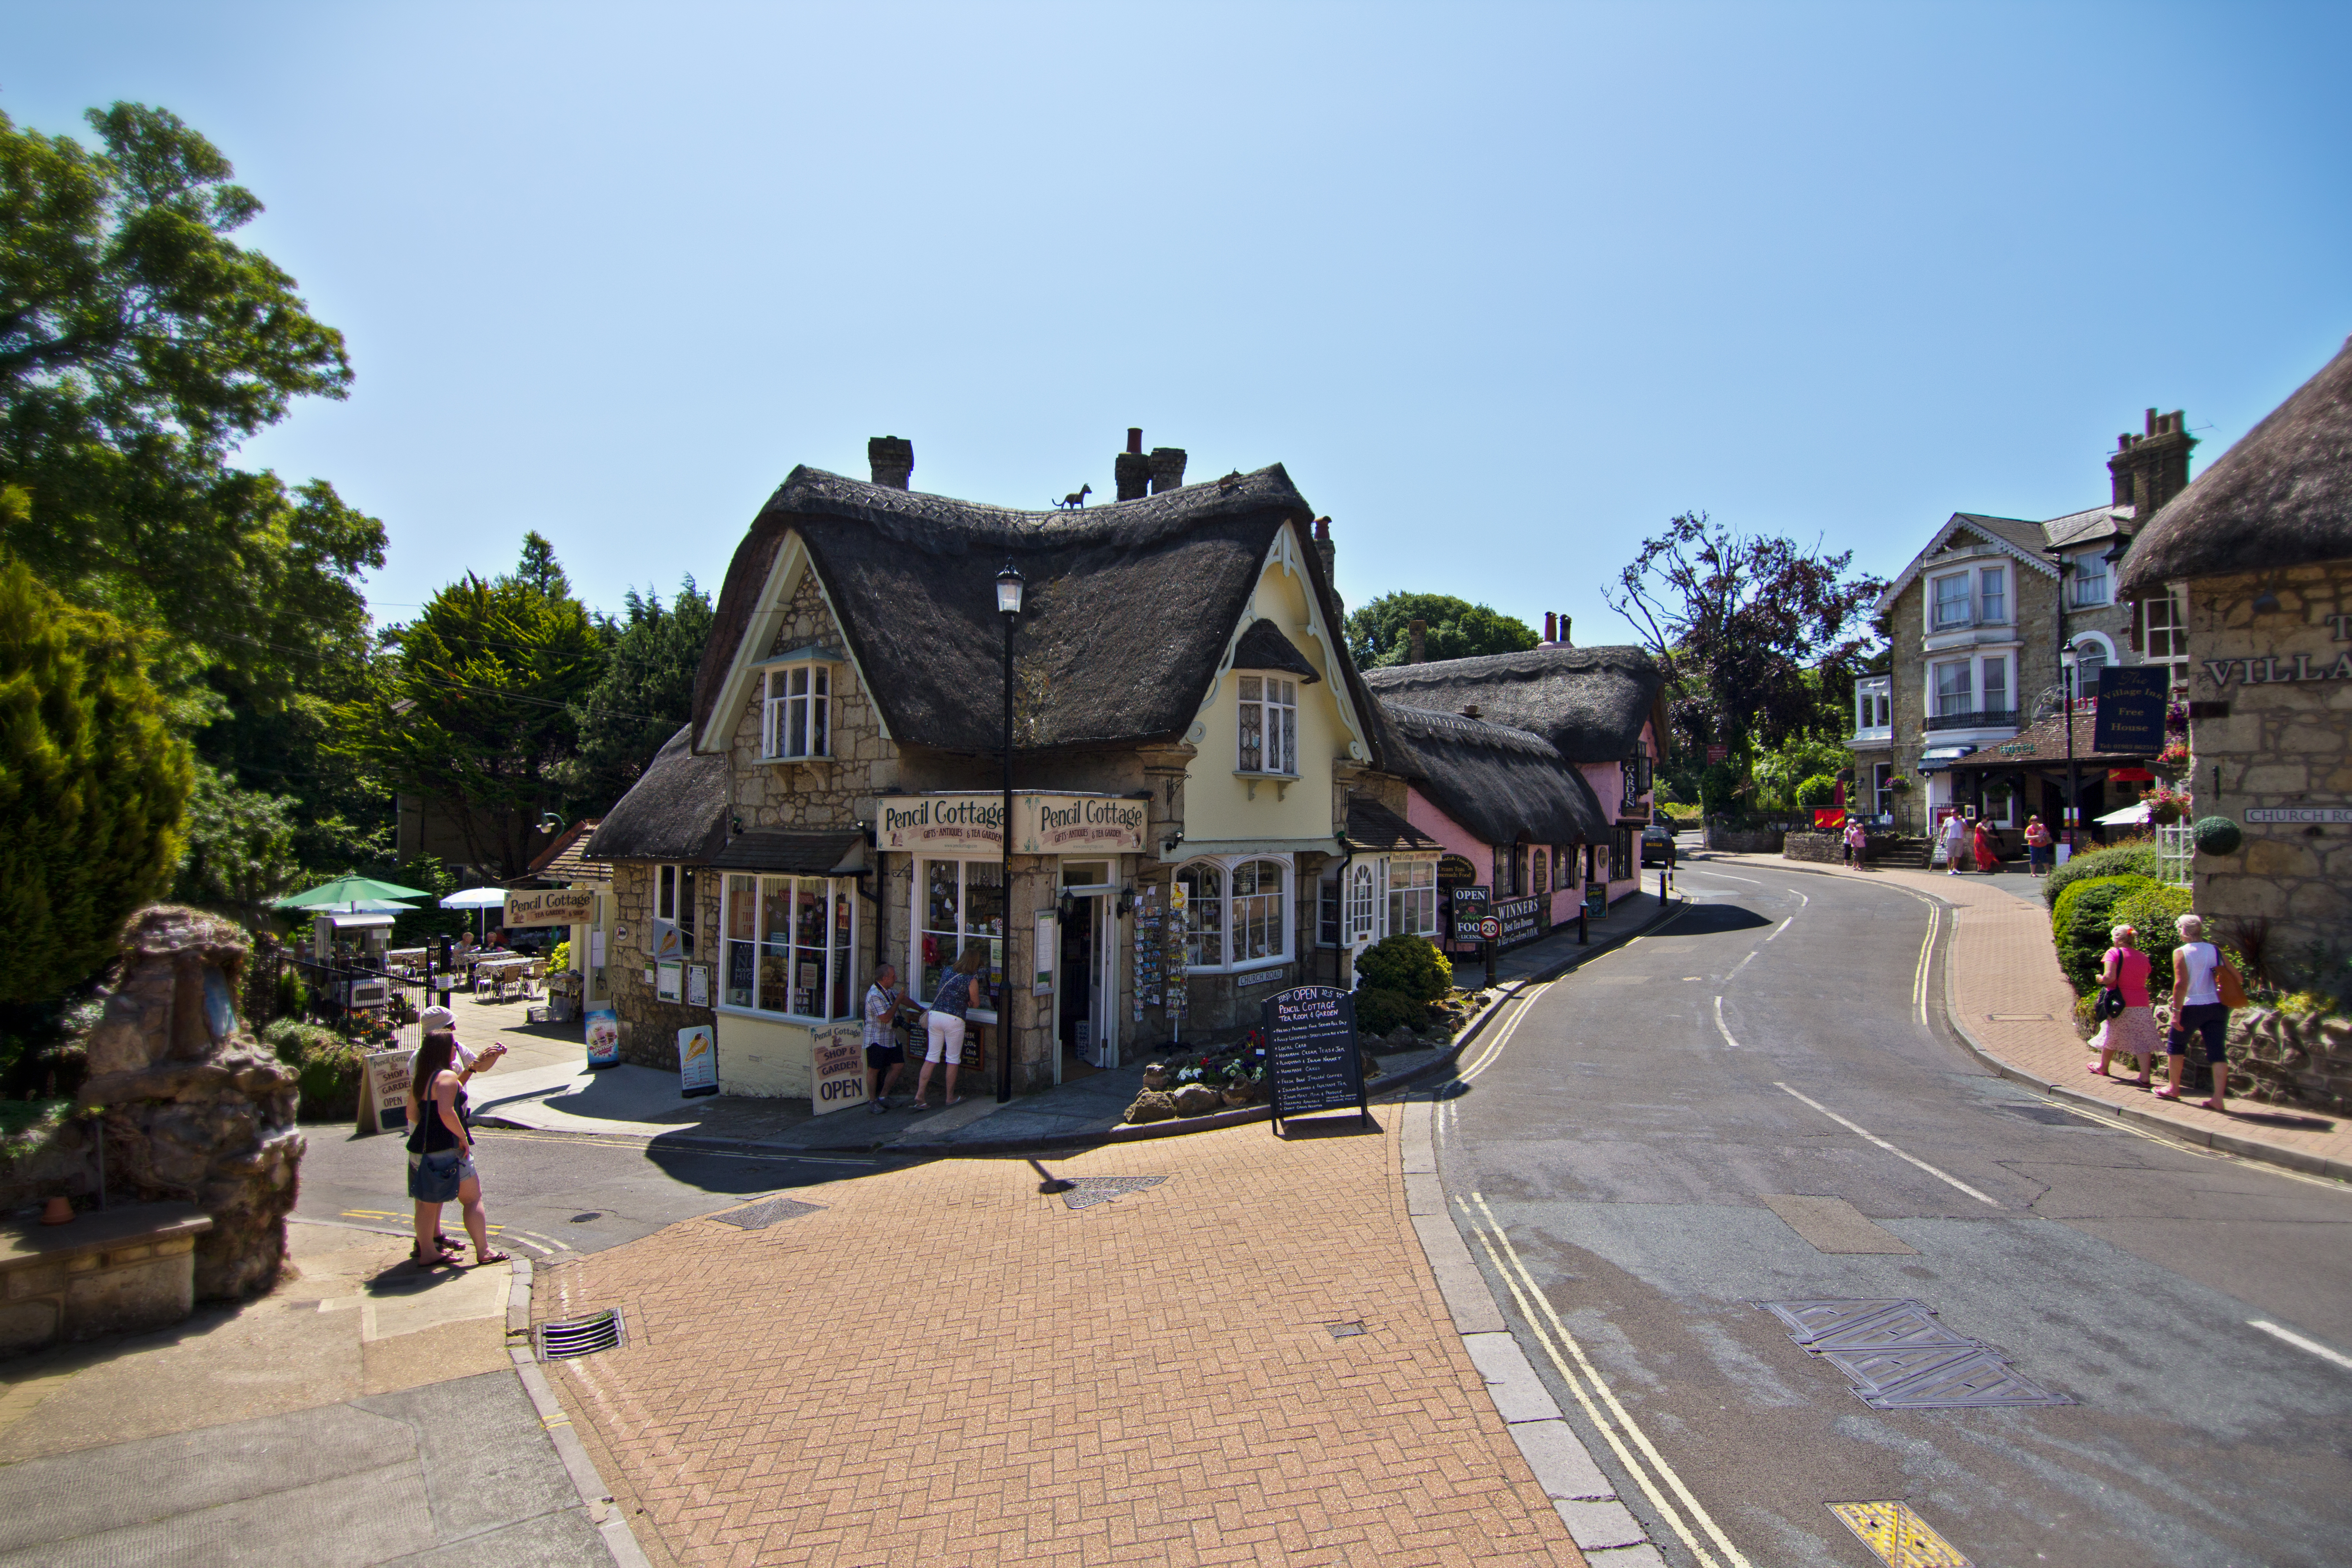 Shanklin Old Village in the Isle of Wight